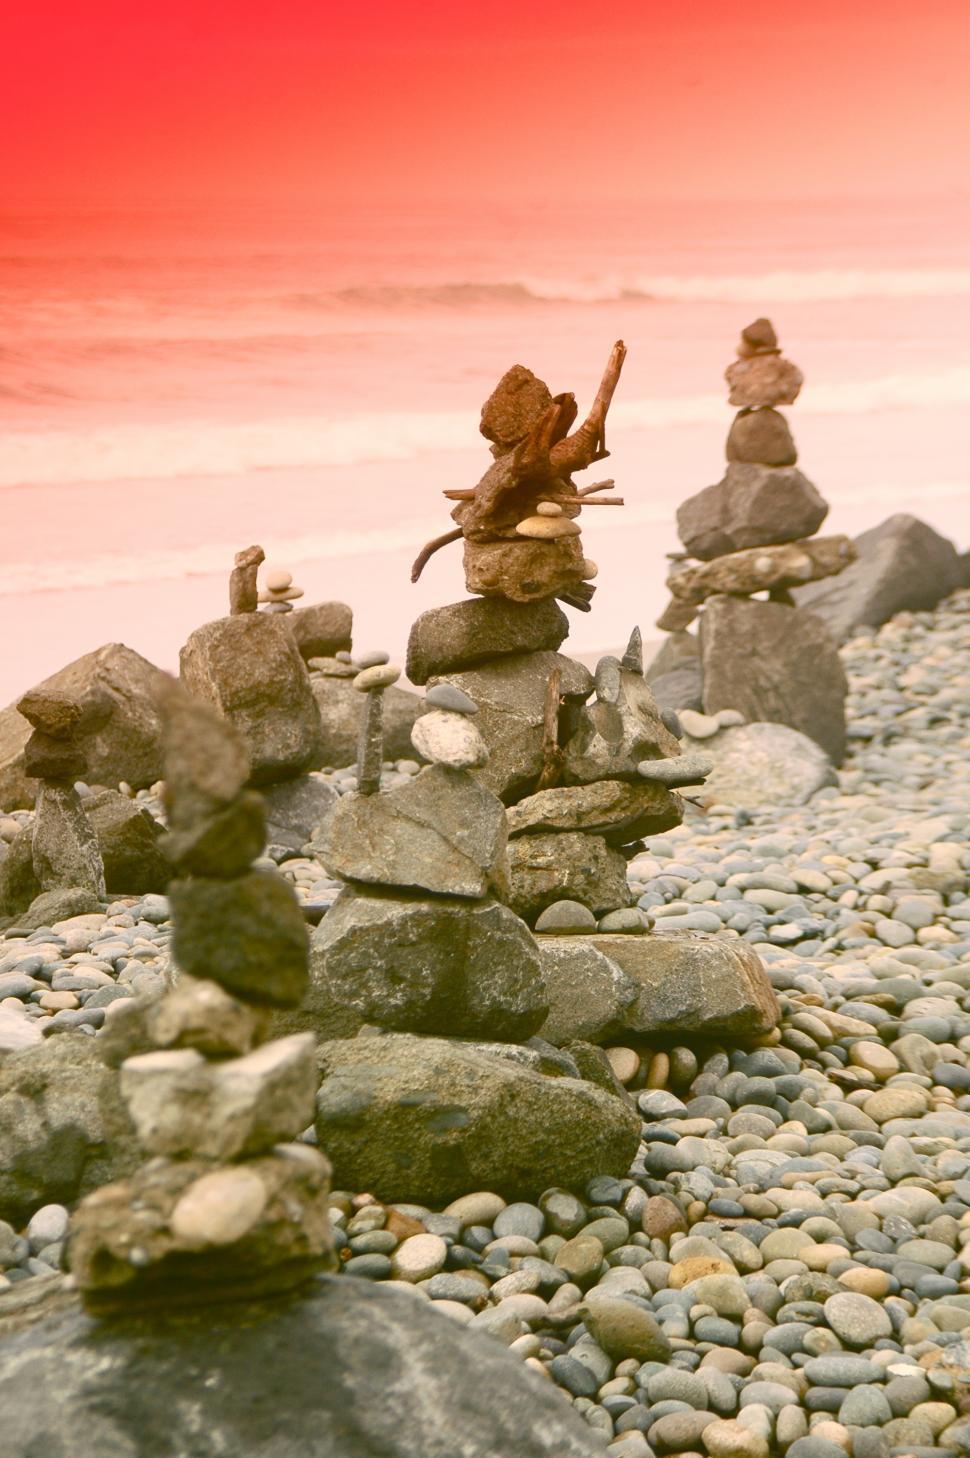 Free Image of Stacked Rock art by the Sea 